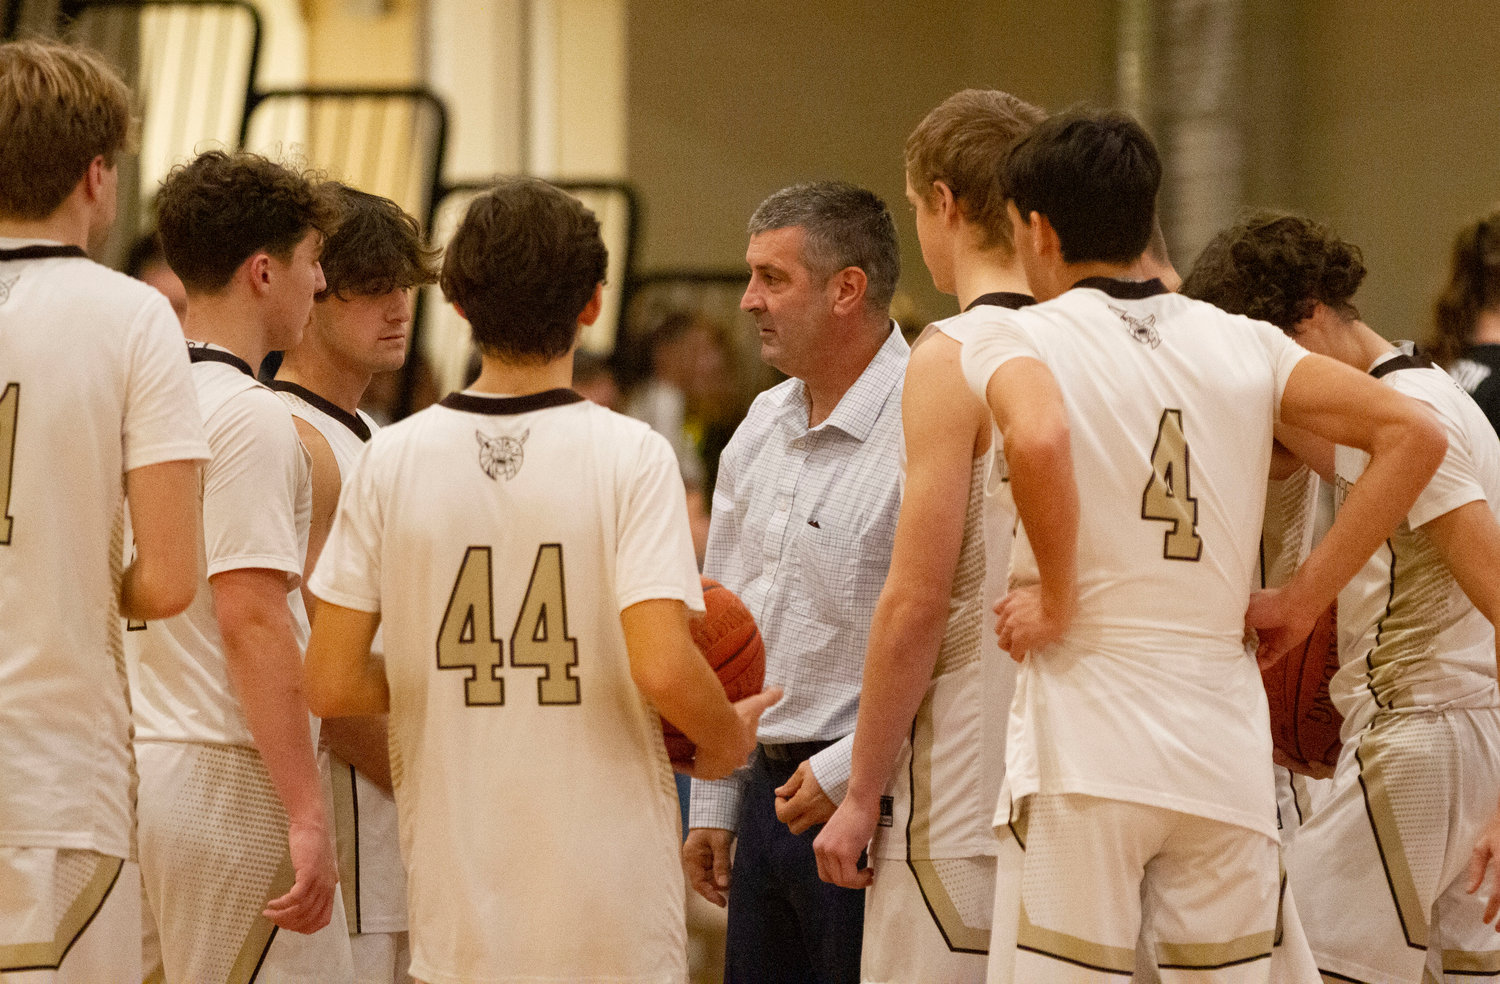 Coach Scot Boudria speaks to the team before the game.